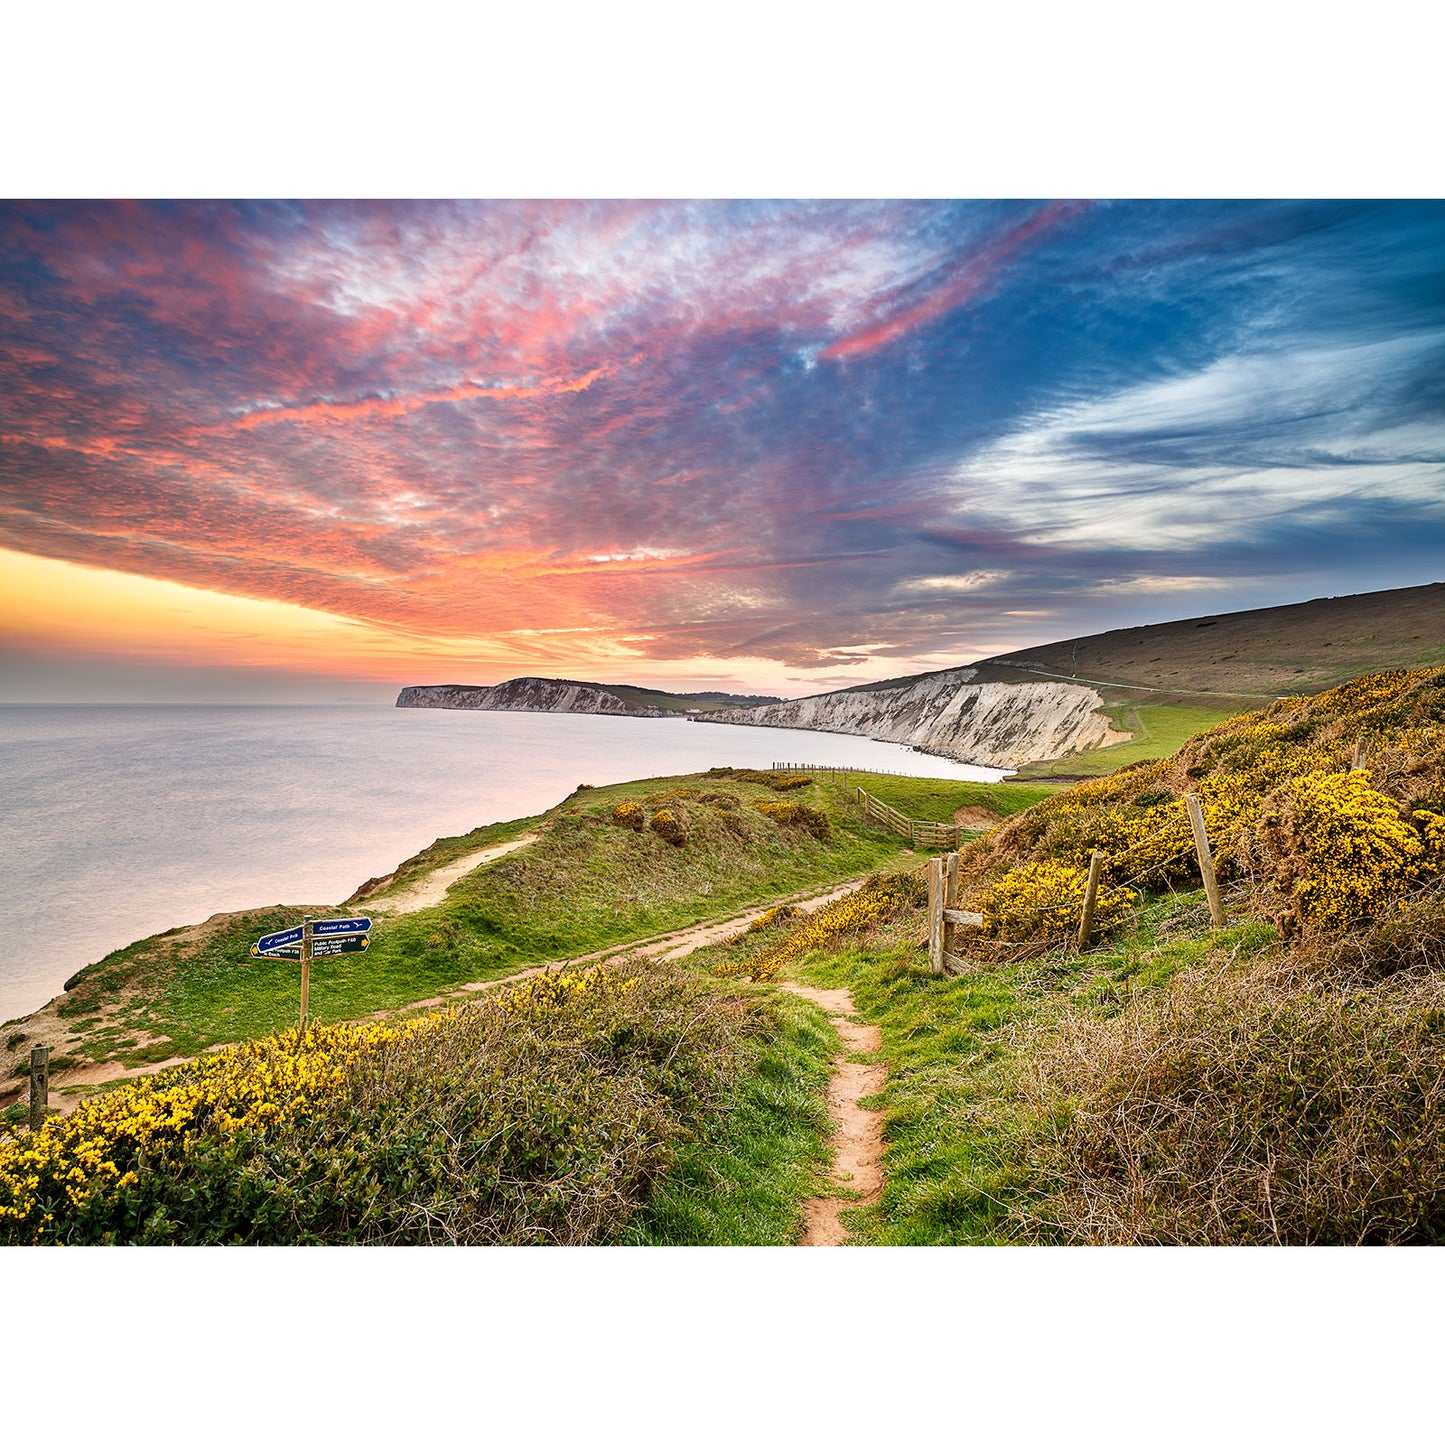 Coastal path on the Isle of Wight leading towards Compton Bay under a vibrant sunset sky. (Available Light Photography)